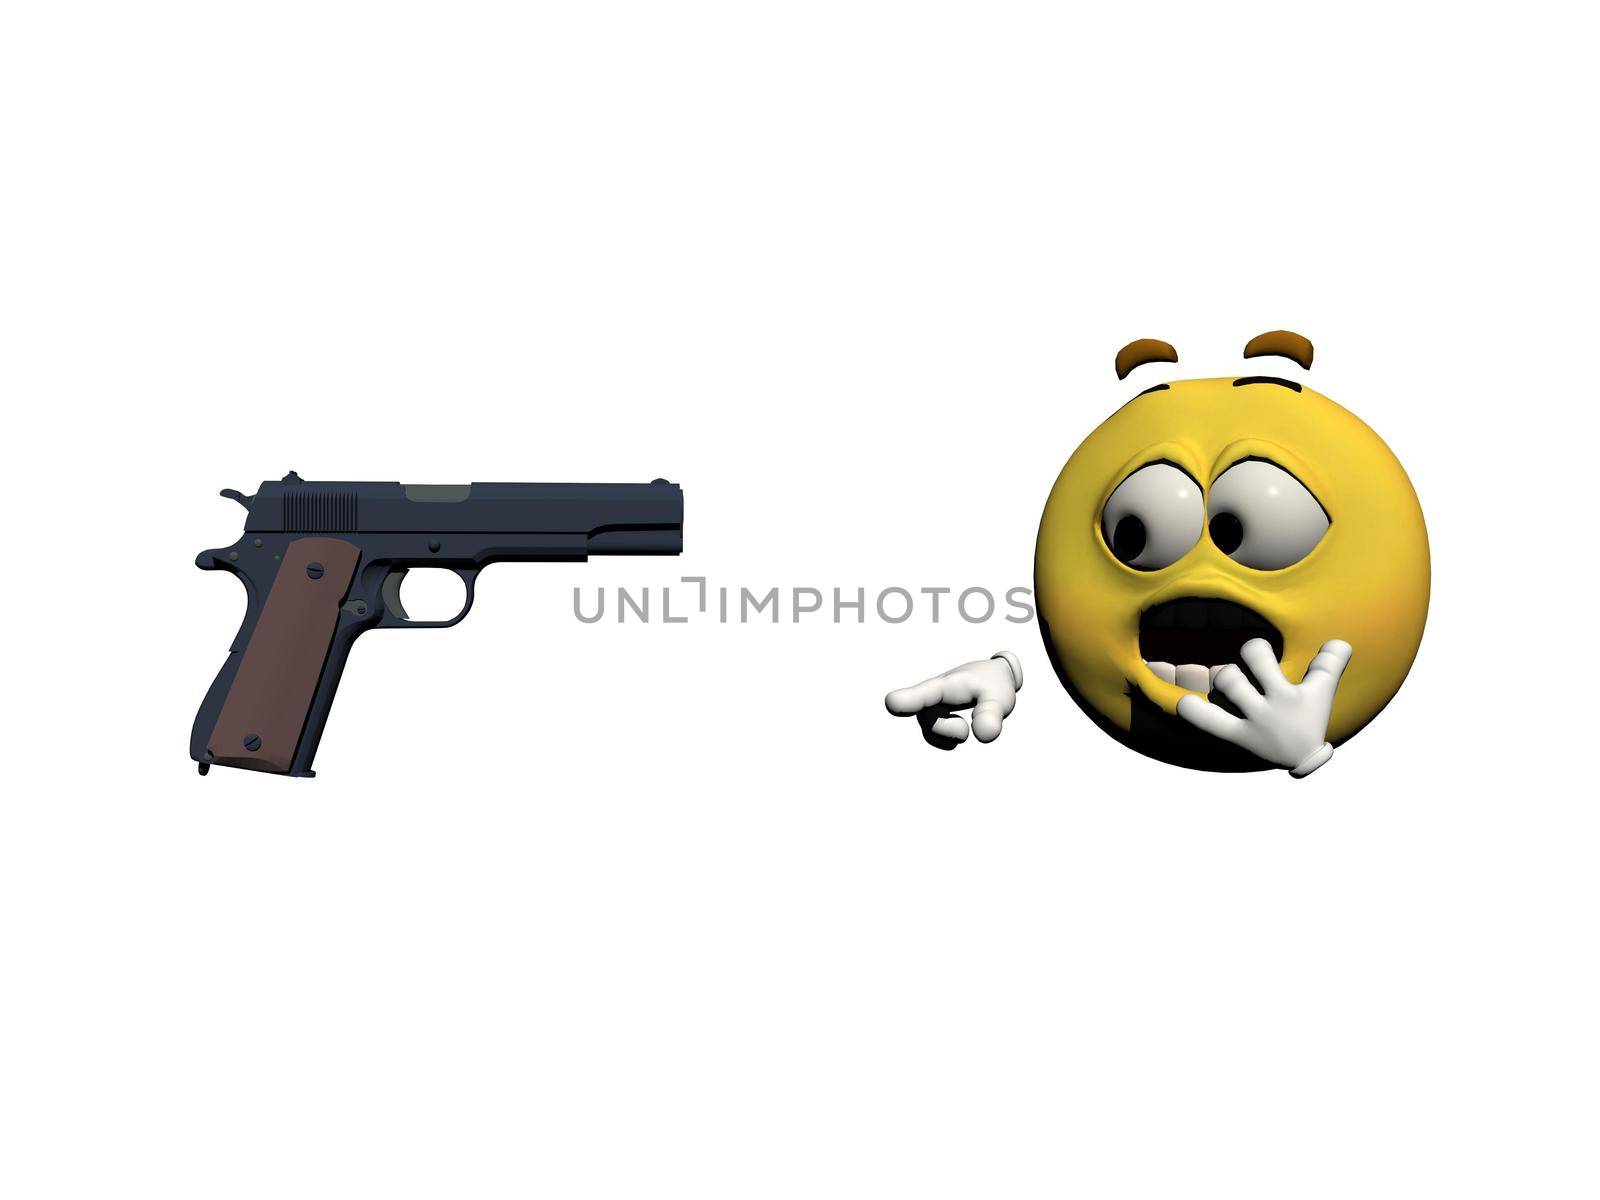 emoticon fear yellow and gun isolated in white background